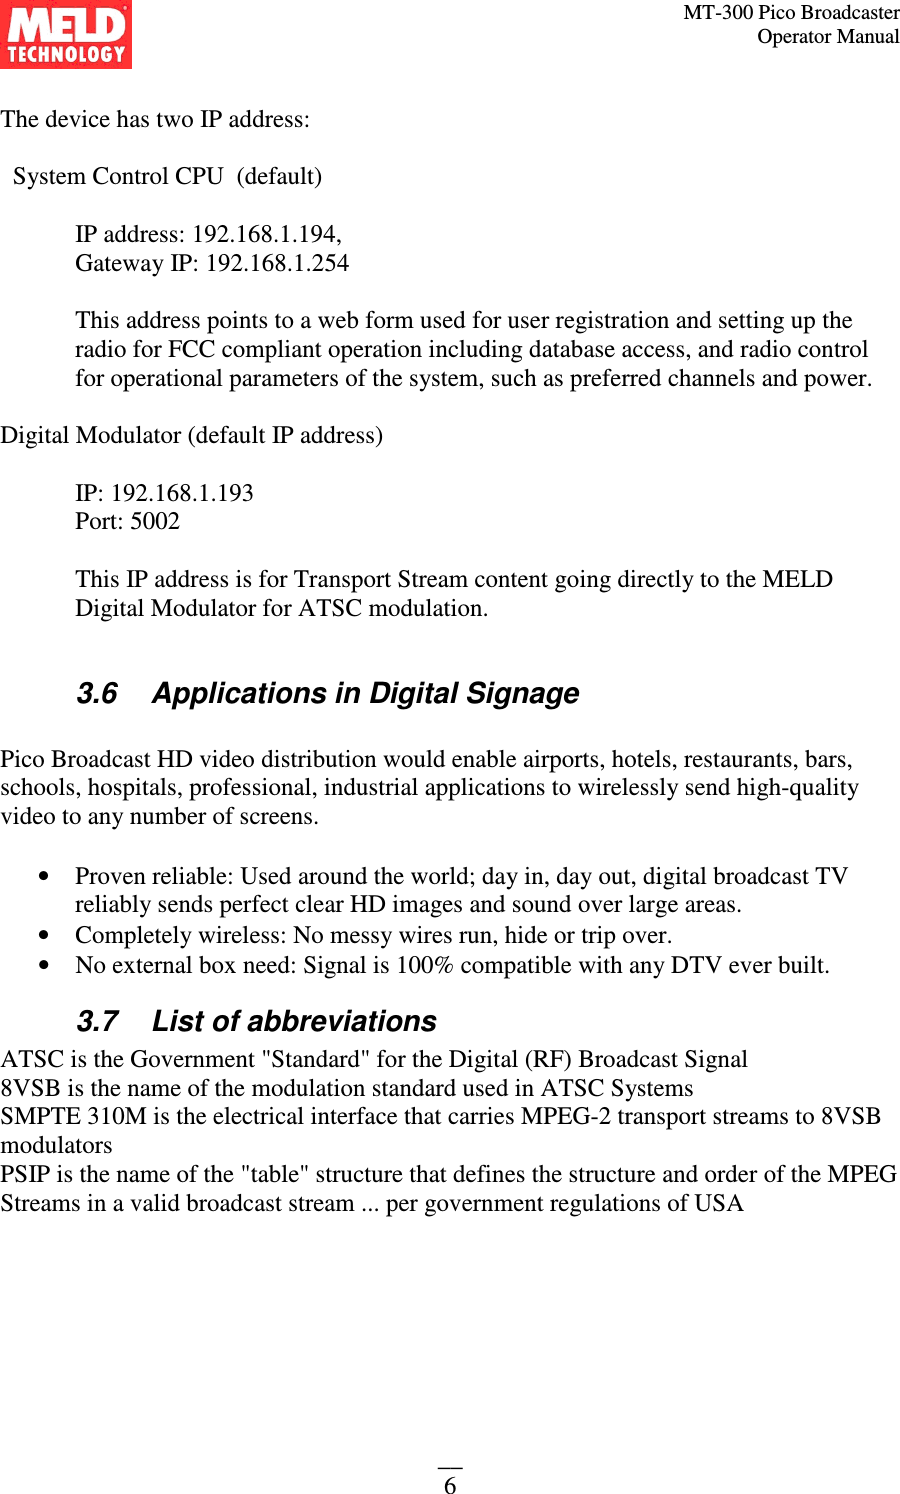 MT-300 Pico Broadcaster                                                                                                                                             Operator Manual __ 6  The device has two IP address:      System Control CPU  (default)   IP address: 192.168.1.194,  Gateway IP: 192.168.1.254    This address points to a web form used for user registration and setting up the radio for FCC compliant operation including database access, and radio control for operational parameters of the system, such as preferred channels and power.   Digital Modulator (default IP address)      IP: 192.168.1.193   Port: 5002  This IP address is for Transport Stream content going directly to the MELD Digital Modulator for ATSC modulation.  3.6  Applications in Digital Signage  Pico Broadcast HD video distribution would enable airports, hotels, restaurants, bars, schools, hospitals, professional, industrial applications to wirelessly send high-quality video to any number of screens.  • Proven reliable: Used around the world; day in, day out, digital broadcast TV reliably sends perfect clear HD images and sound over large areas.   • Completely wireless: No messy wires run, hide or trip over.  • No external box need: Signal is 100% compatible with any DTV ever built. 3.7  List of abbreviations ATSC is the Government &quot;Standard&quot; for the Digital (RF) Broadcast Signal  8VSB is the name of the modulation standard used in ATSC Systems  SMPTE 310M is the electrical interface that carries MPEG-2 transport streams to 8VSB modulators  PSIP is the name of the &quot;table&quot; structure that defines the structure and order of the MPEG Streams in a valid broadcast stream ... per government regulations of USA 